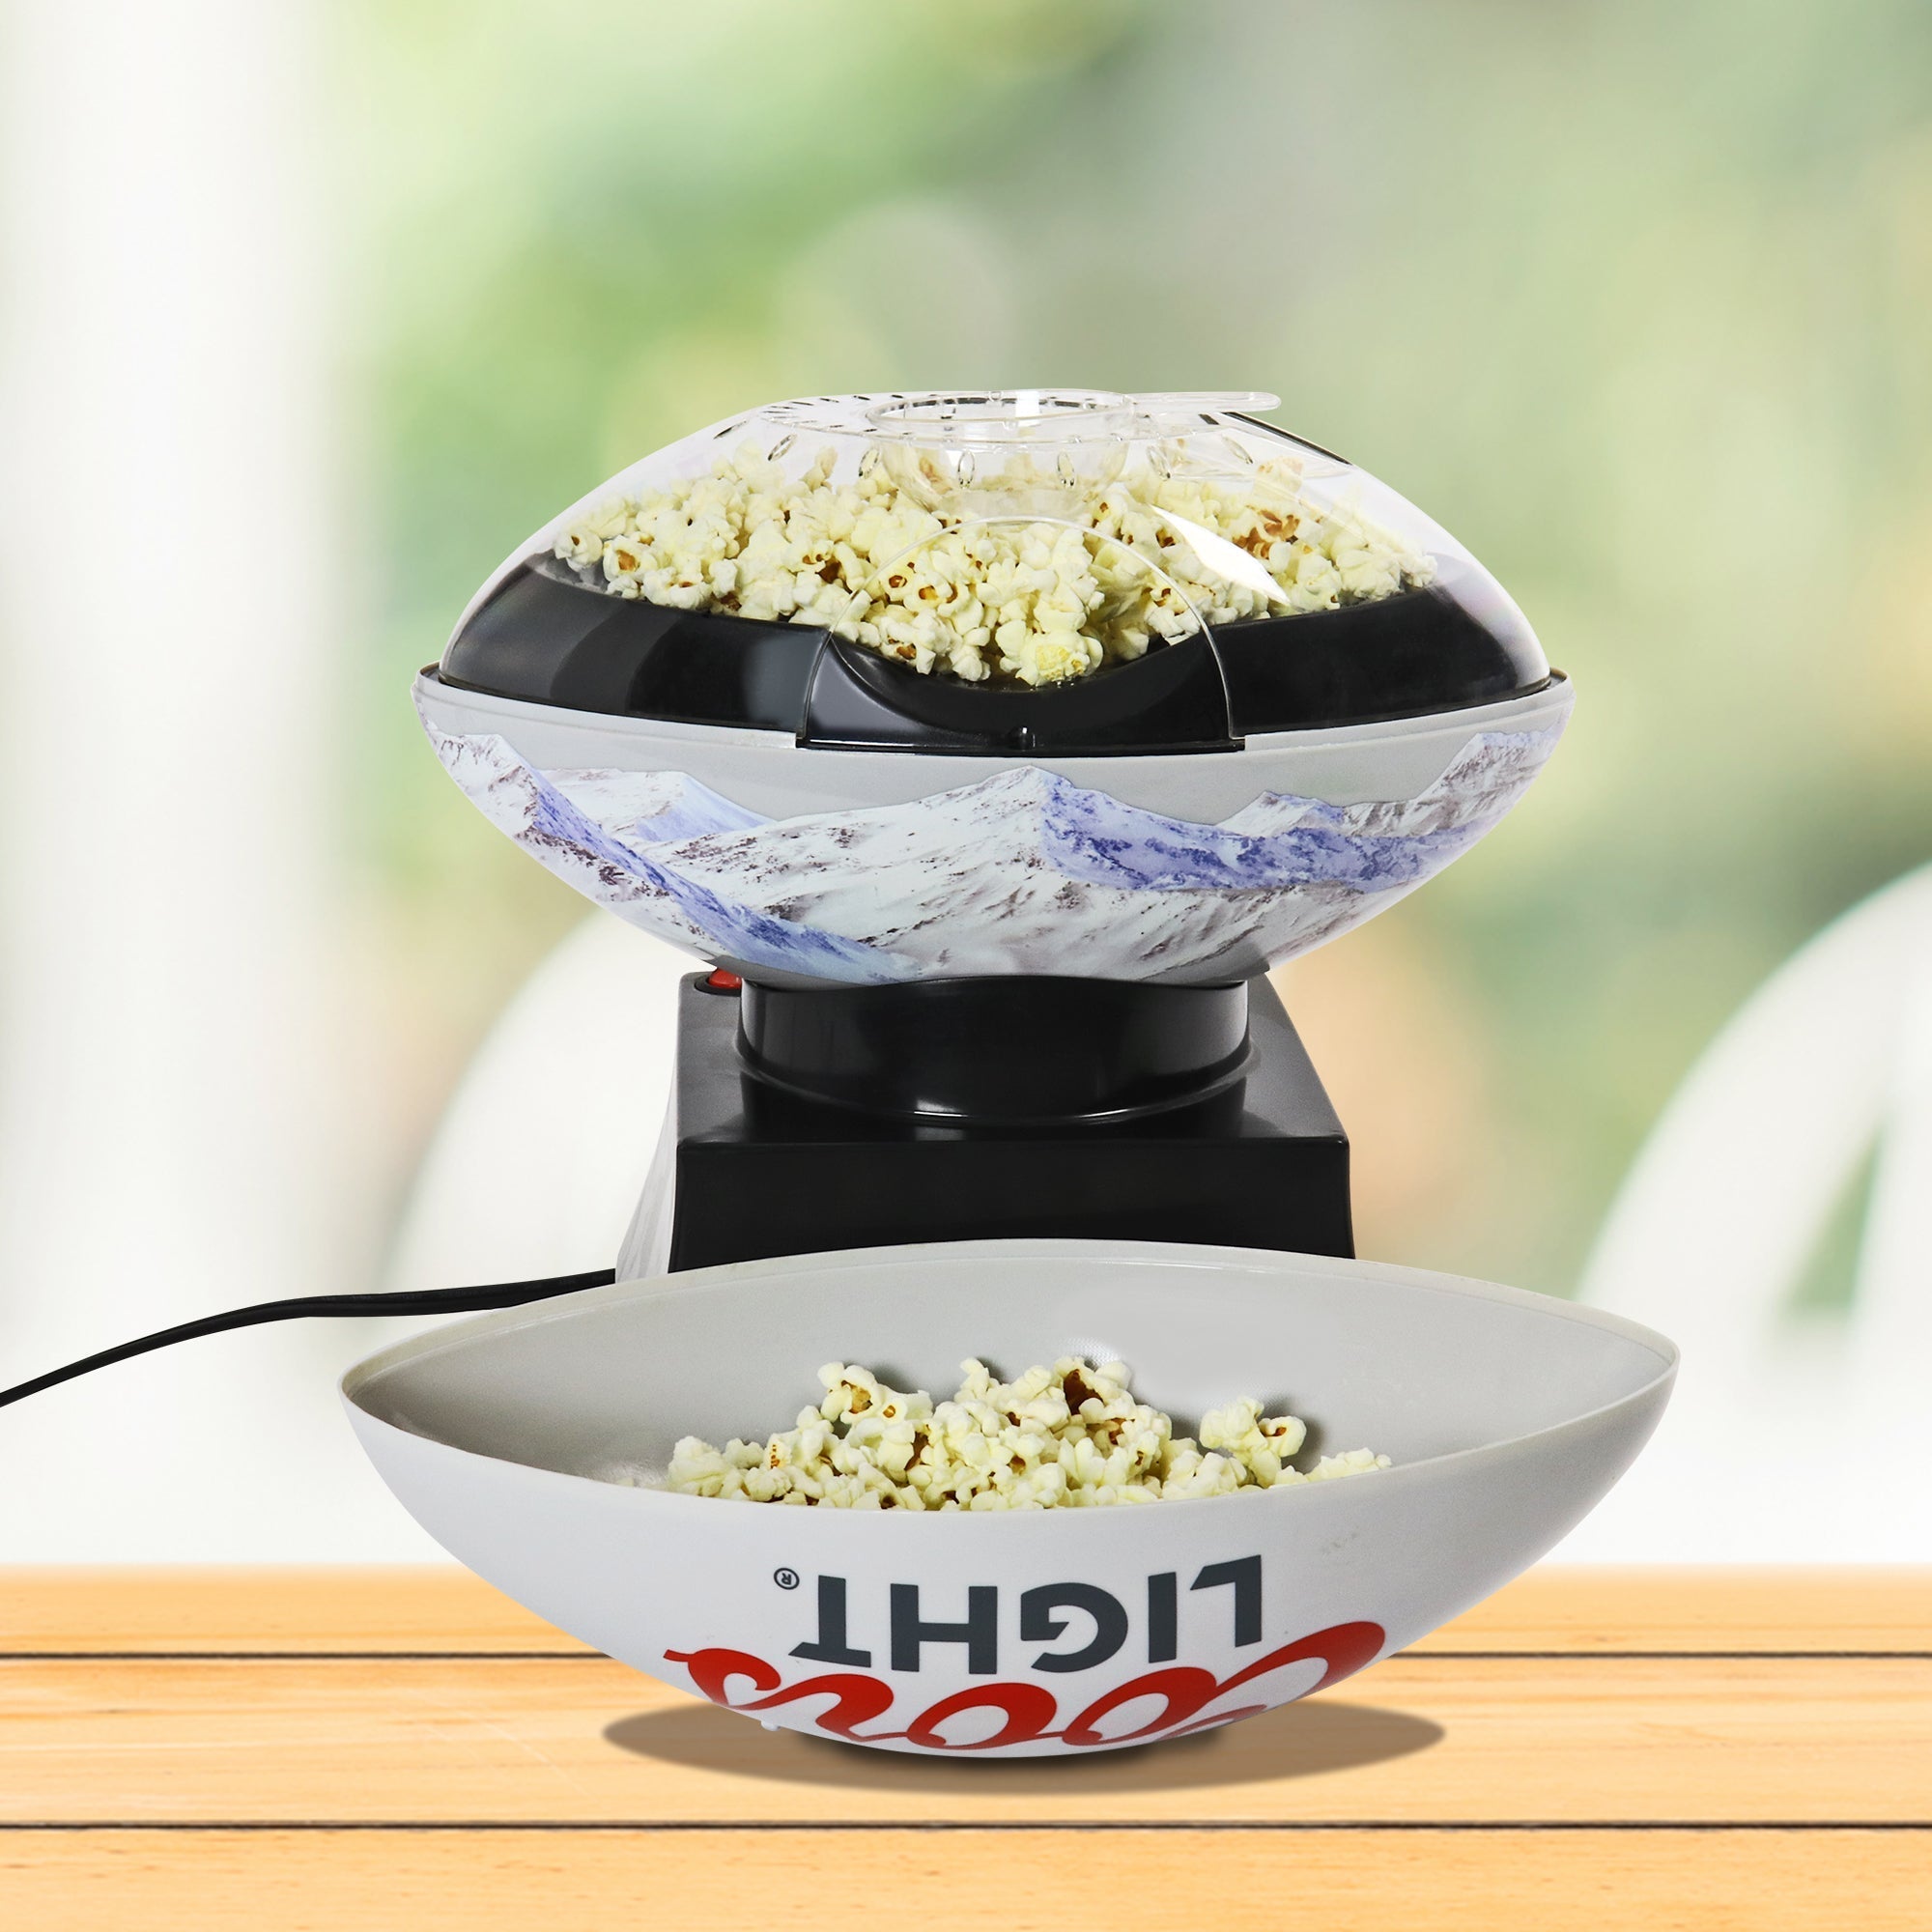 Lifestyle image of Coors Light air popper on a wooden table with popcorn popping inside and the serving bowl half full of popcorn in front